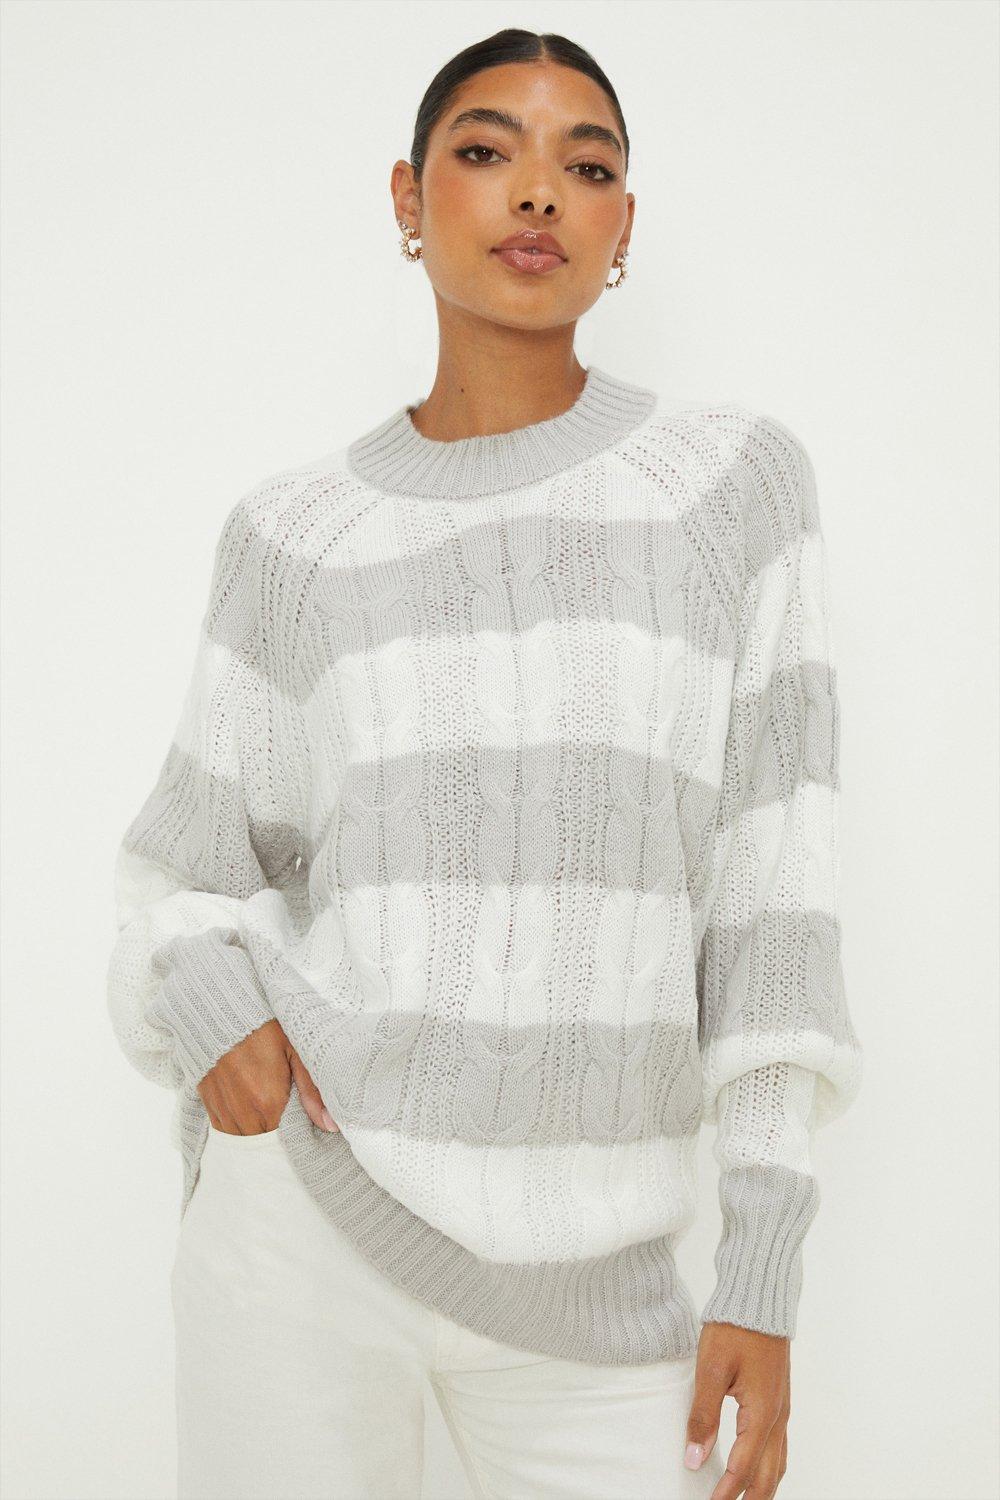 Women’s Stripe Cable High Neck Tunic Jumper - grey - XS